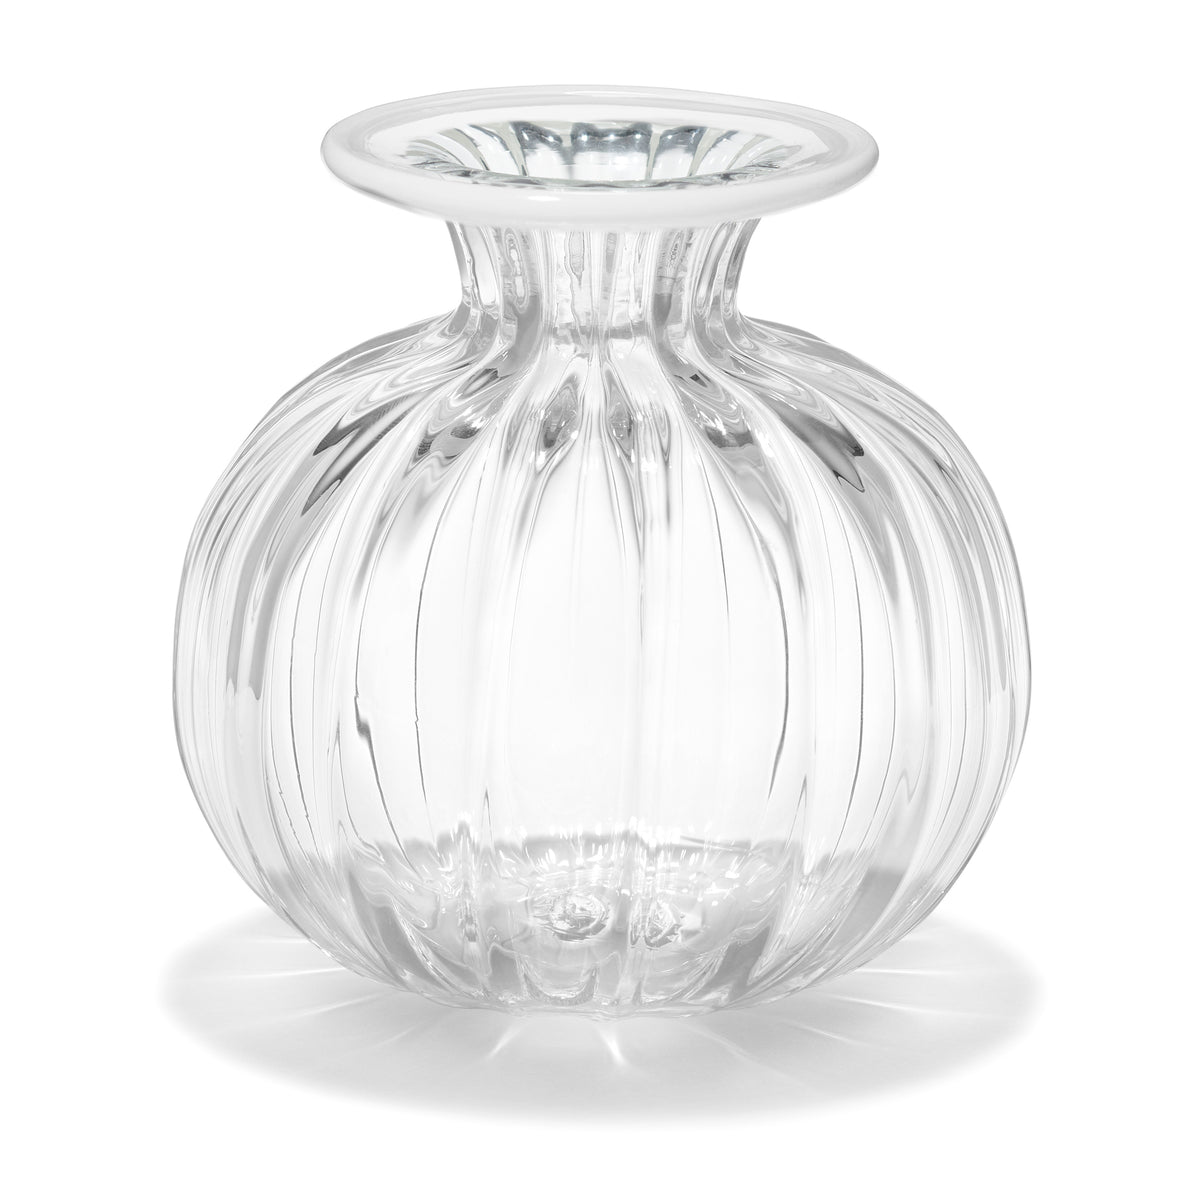 Clementina Vertical Optic Texture Bud Vase with White Rim